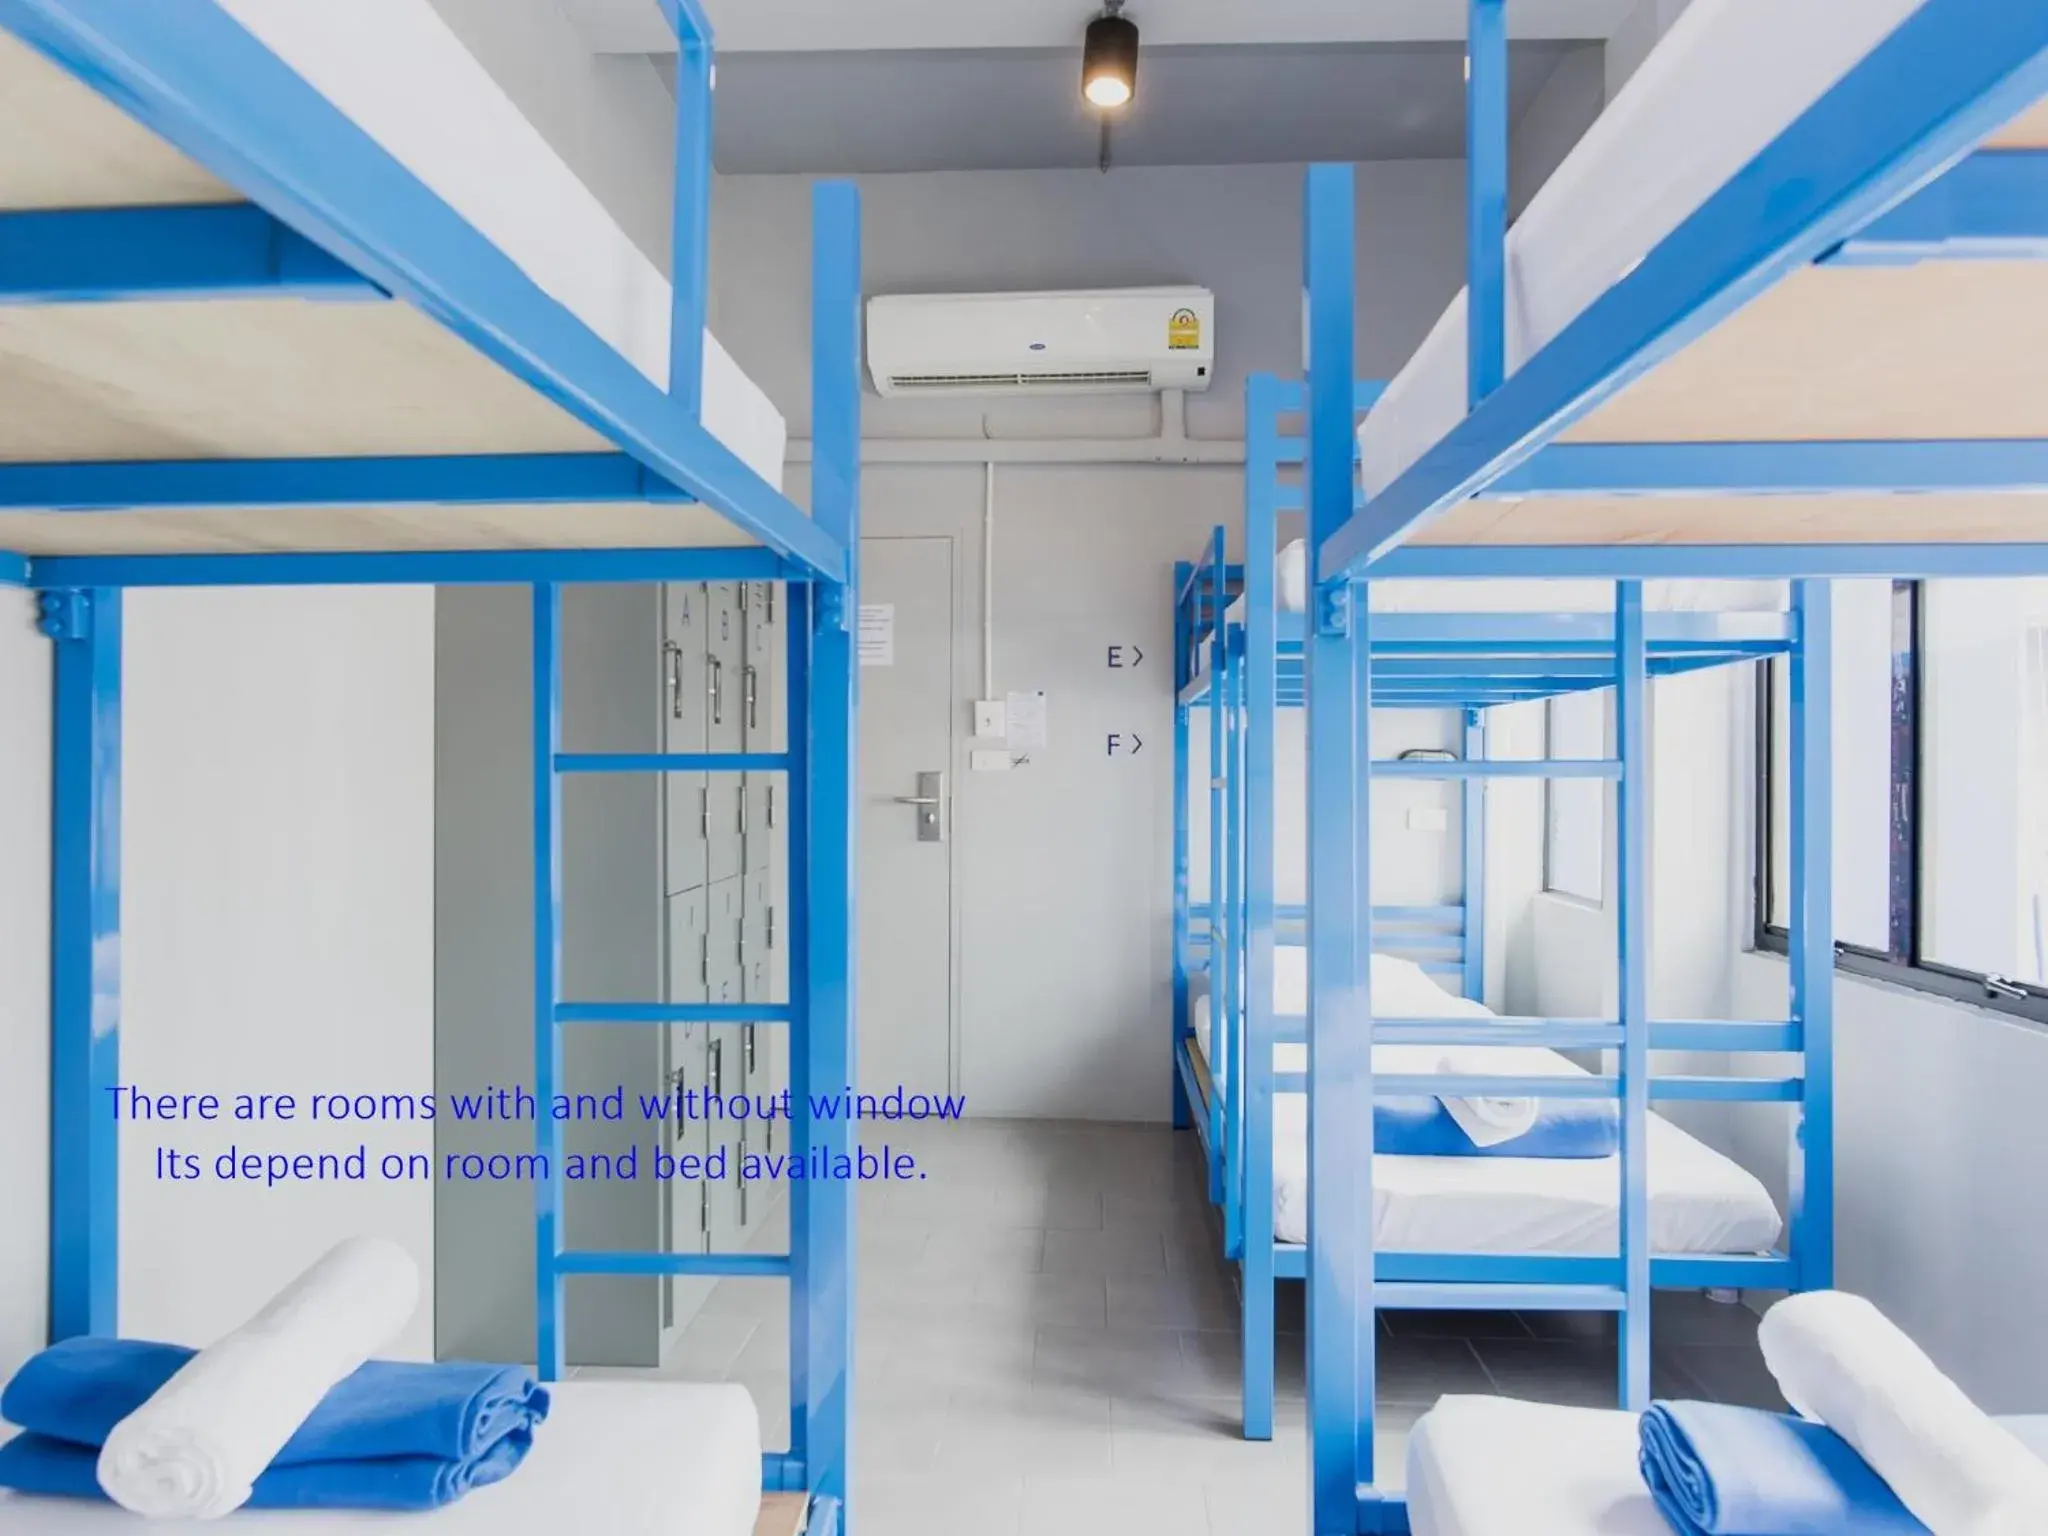 Bunk Bed in 6-Bed Mixed Dormitory Room in Loftel Station Hostel